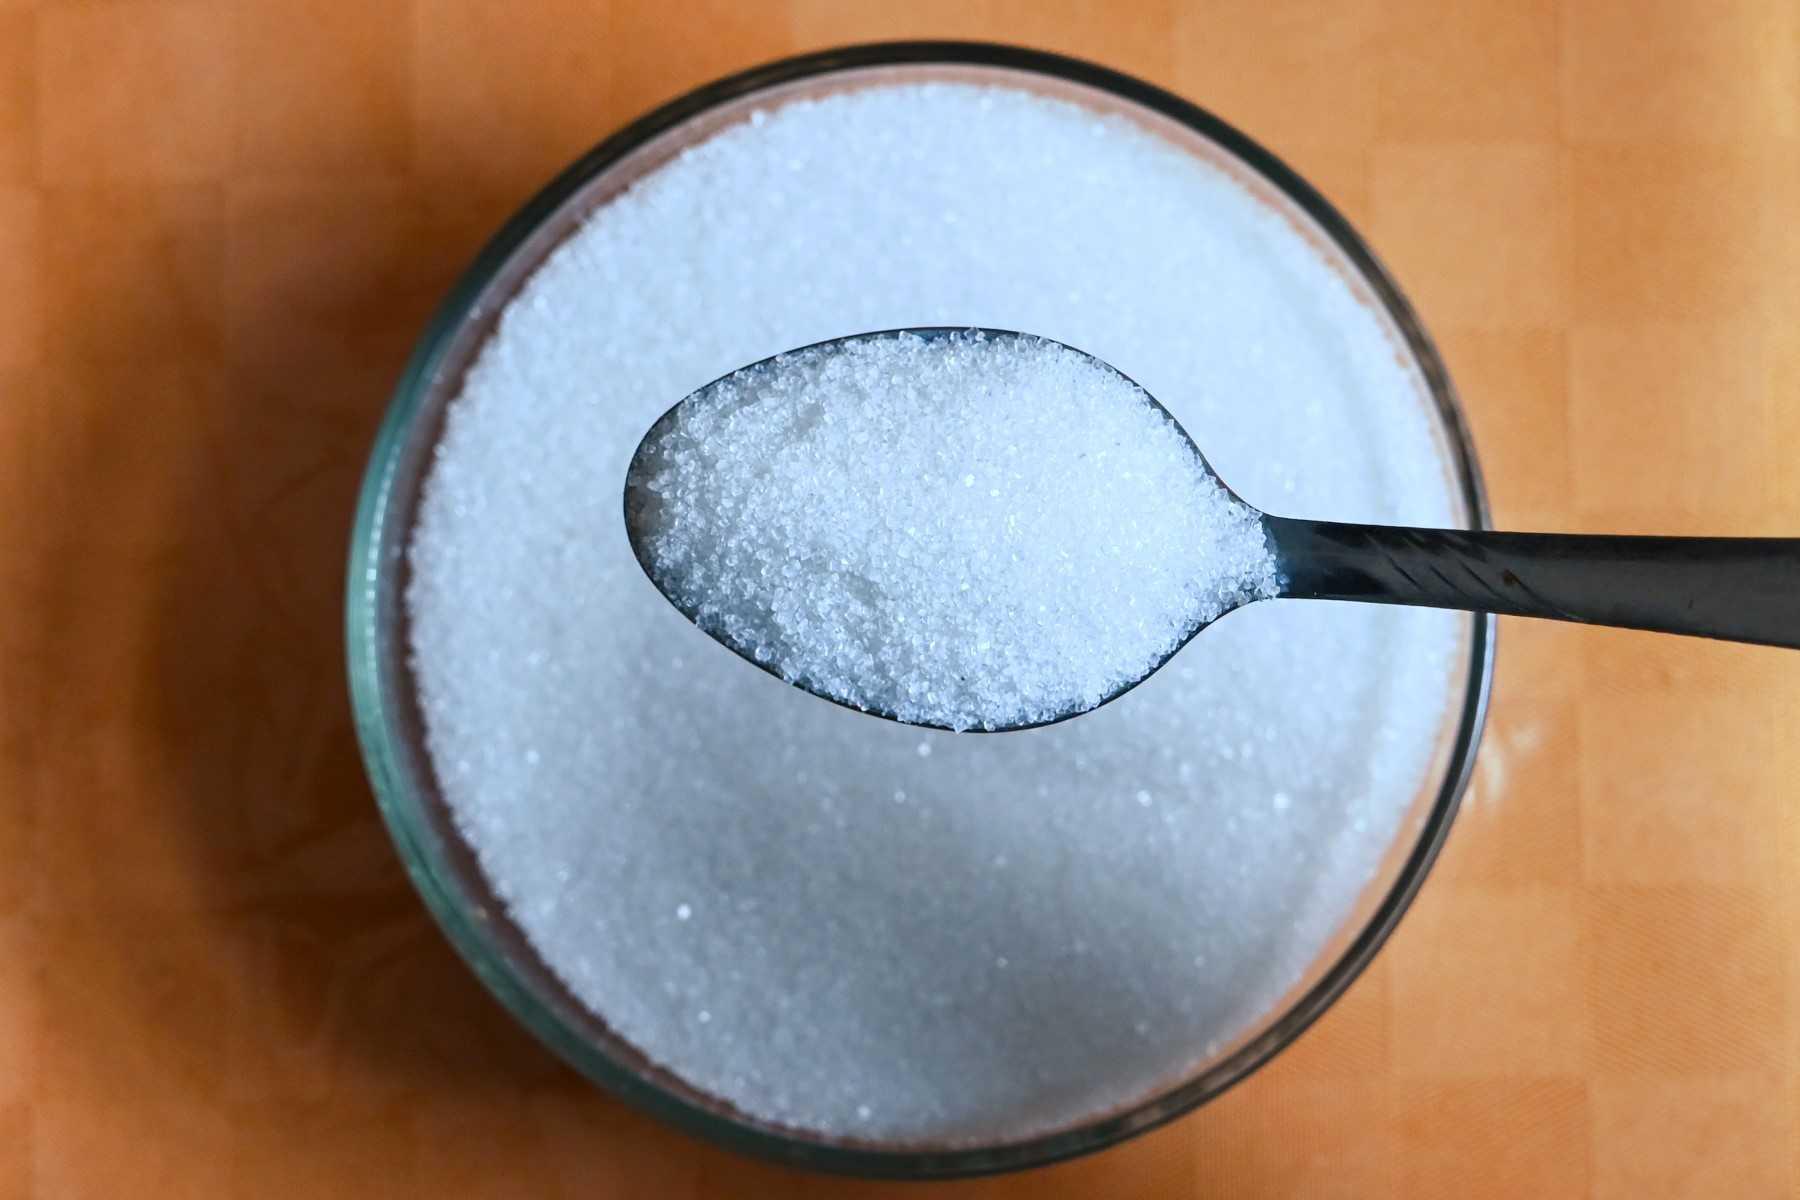 Sweeteners are consumed by millions every day in products like diet soda or to sweeten coffee, partly as a way to avoid weight gain from sugar. Photo: AFP